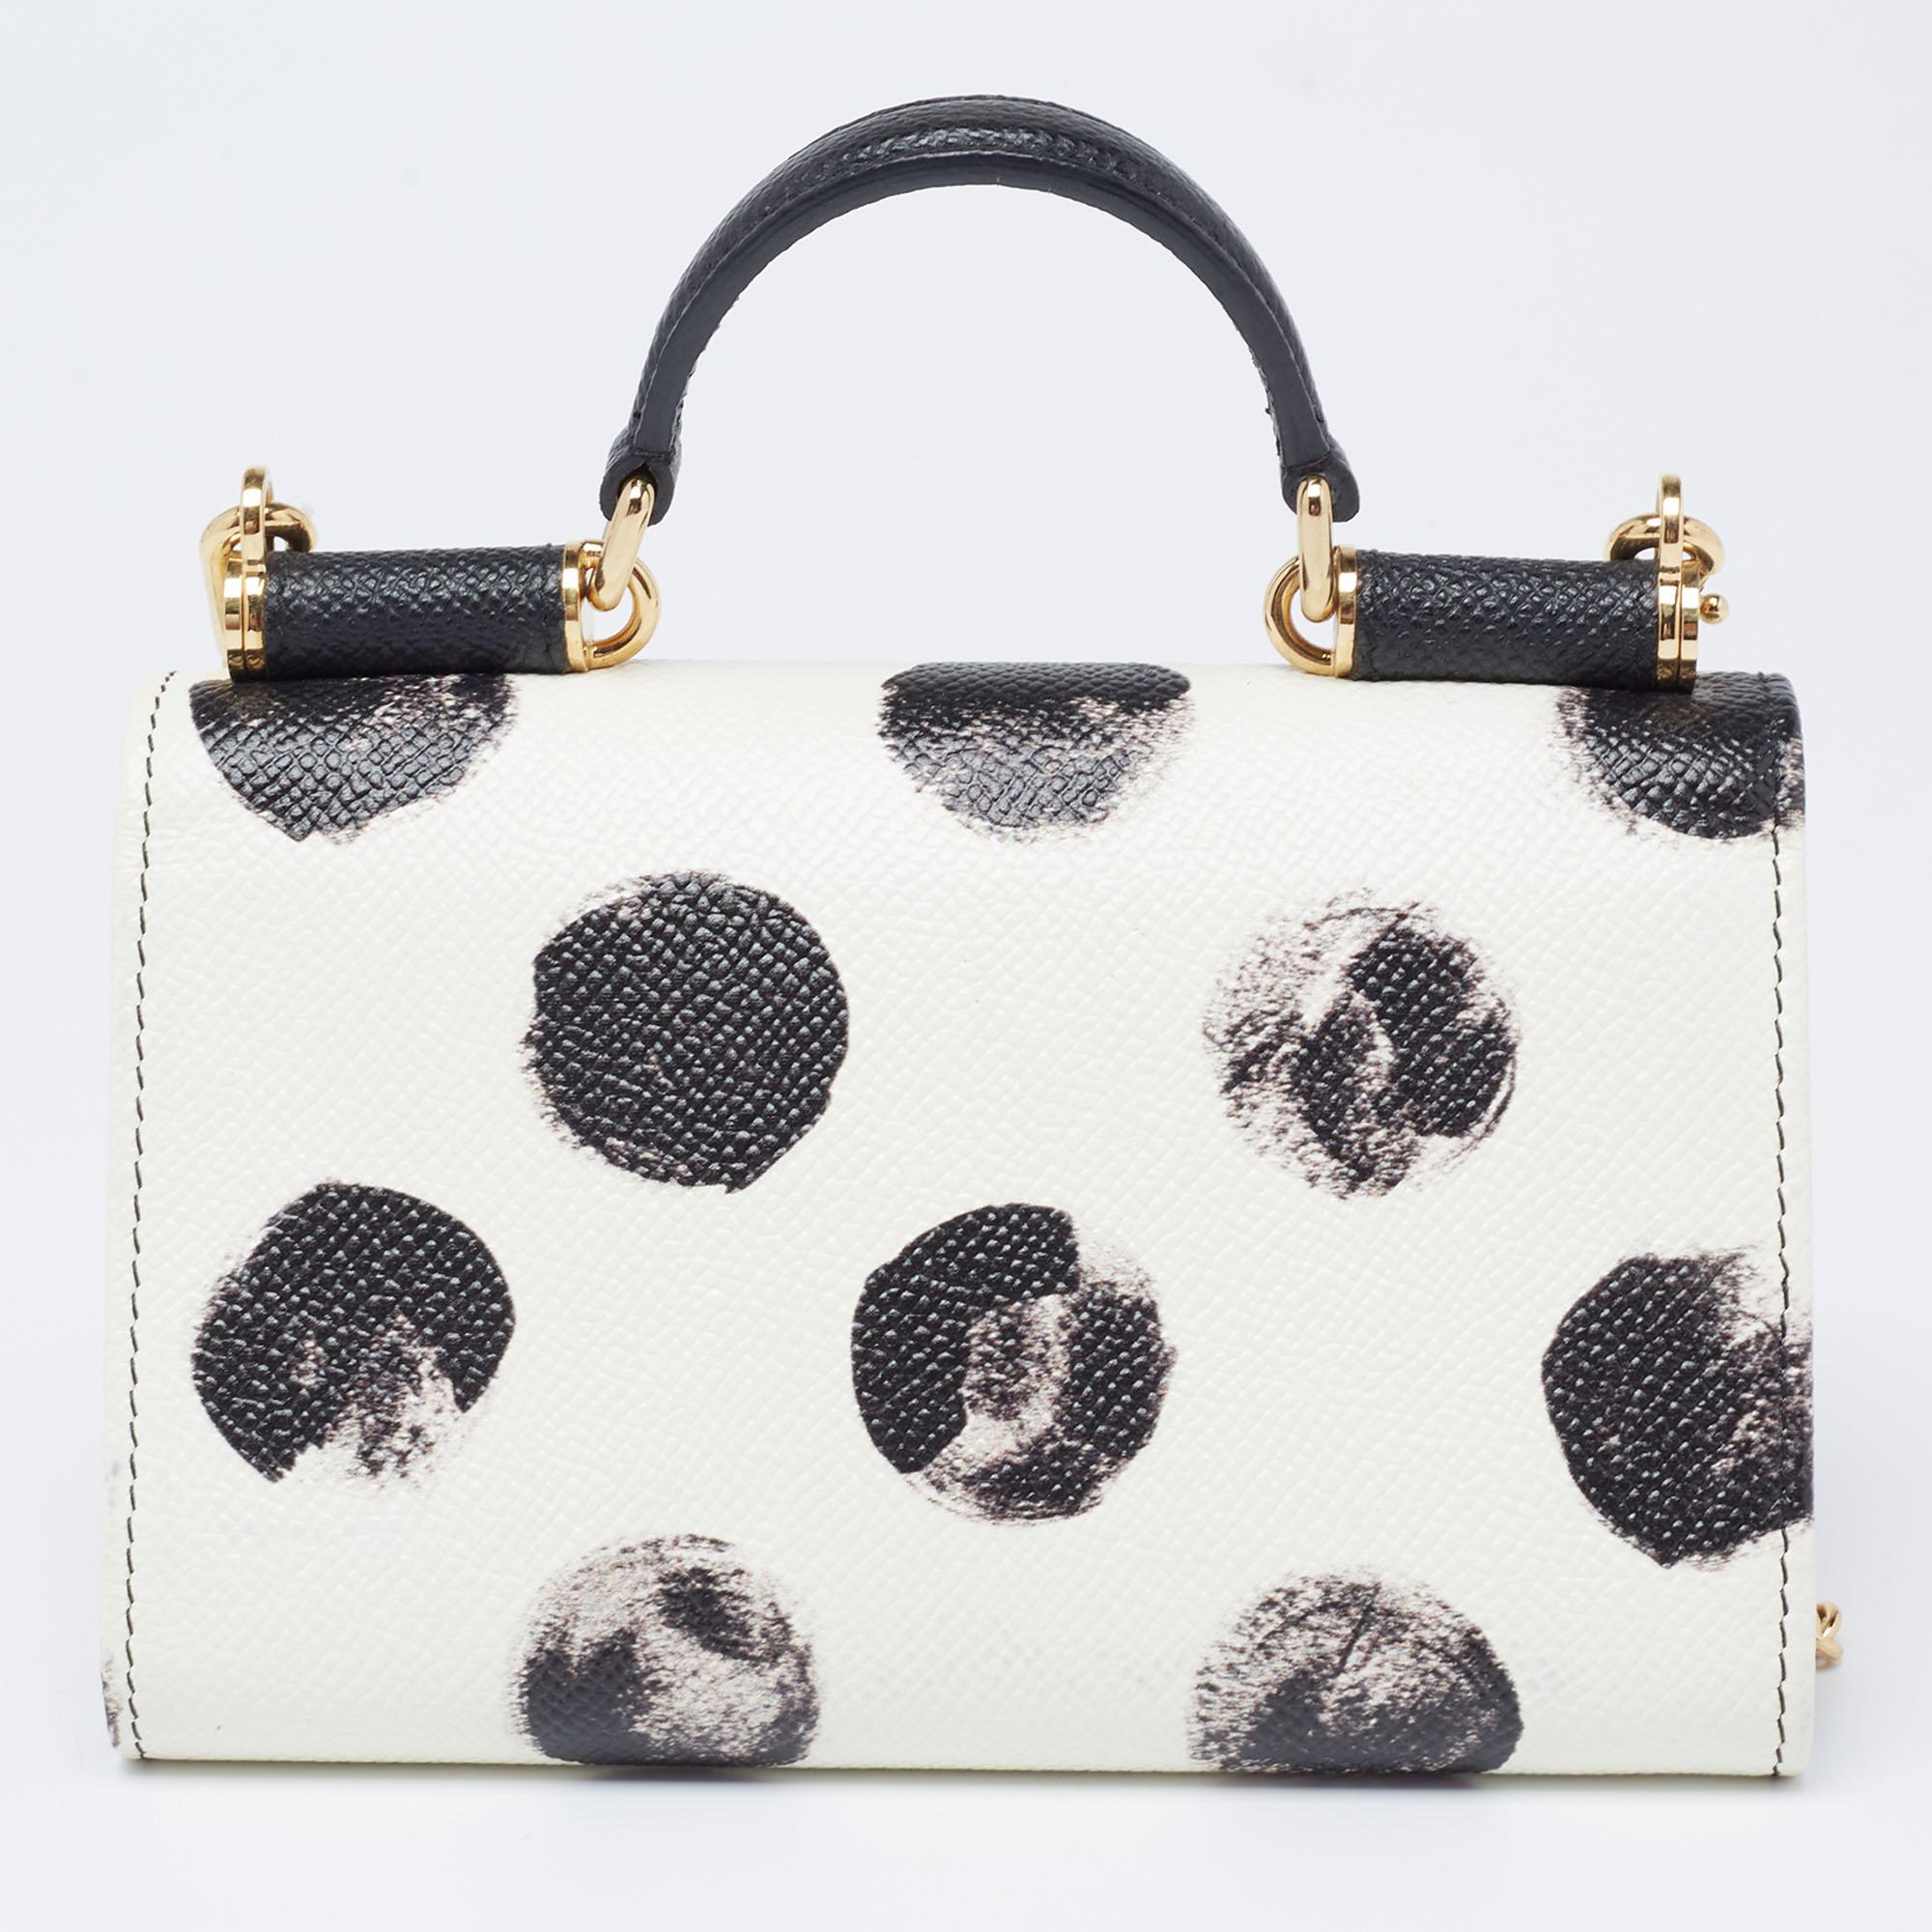 Displaying a graceful silhouette and a sturdy design, this fascinating Miss Sicily Von wallet on chain from Dolce & Gabbana rightly represents the brand's skilled flair. It is made from black-white polka-dot leather, with a gold-toned logo plaque